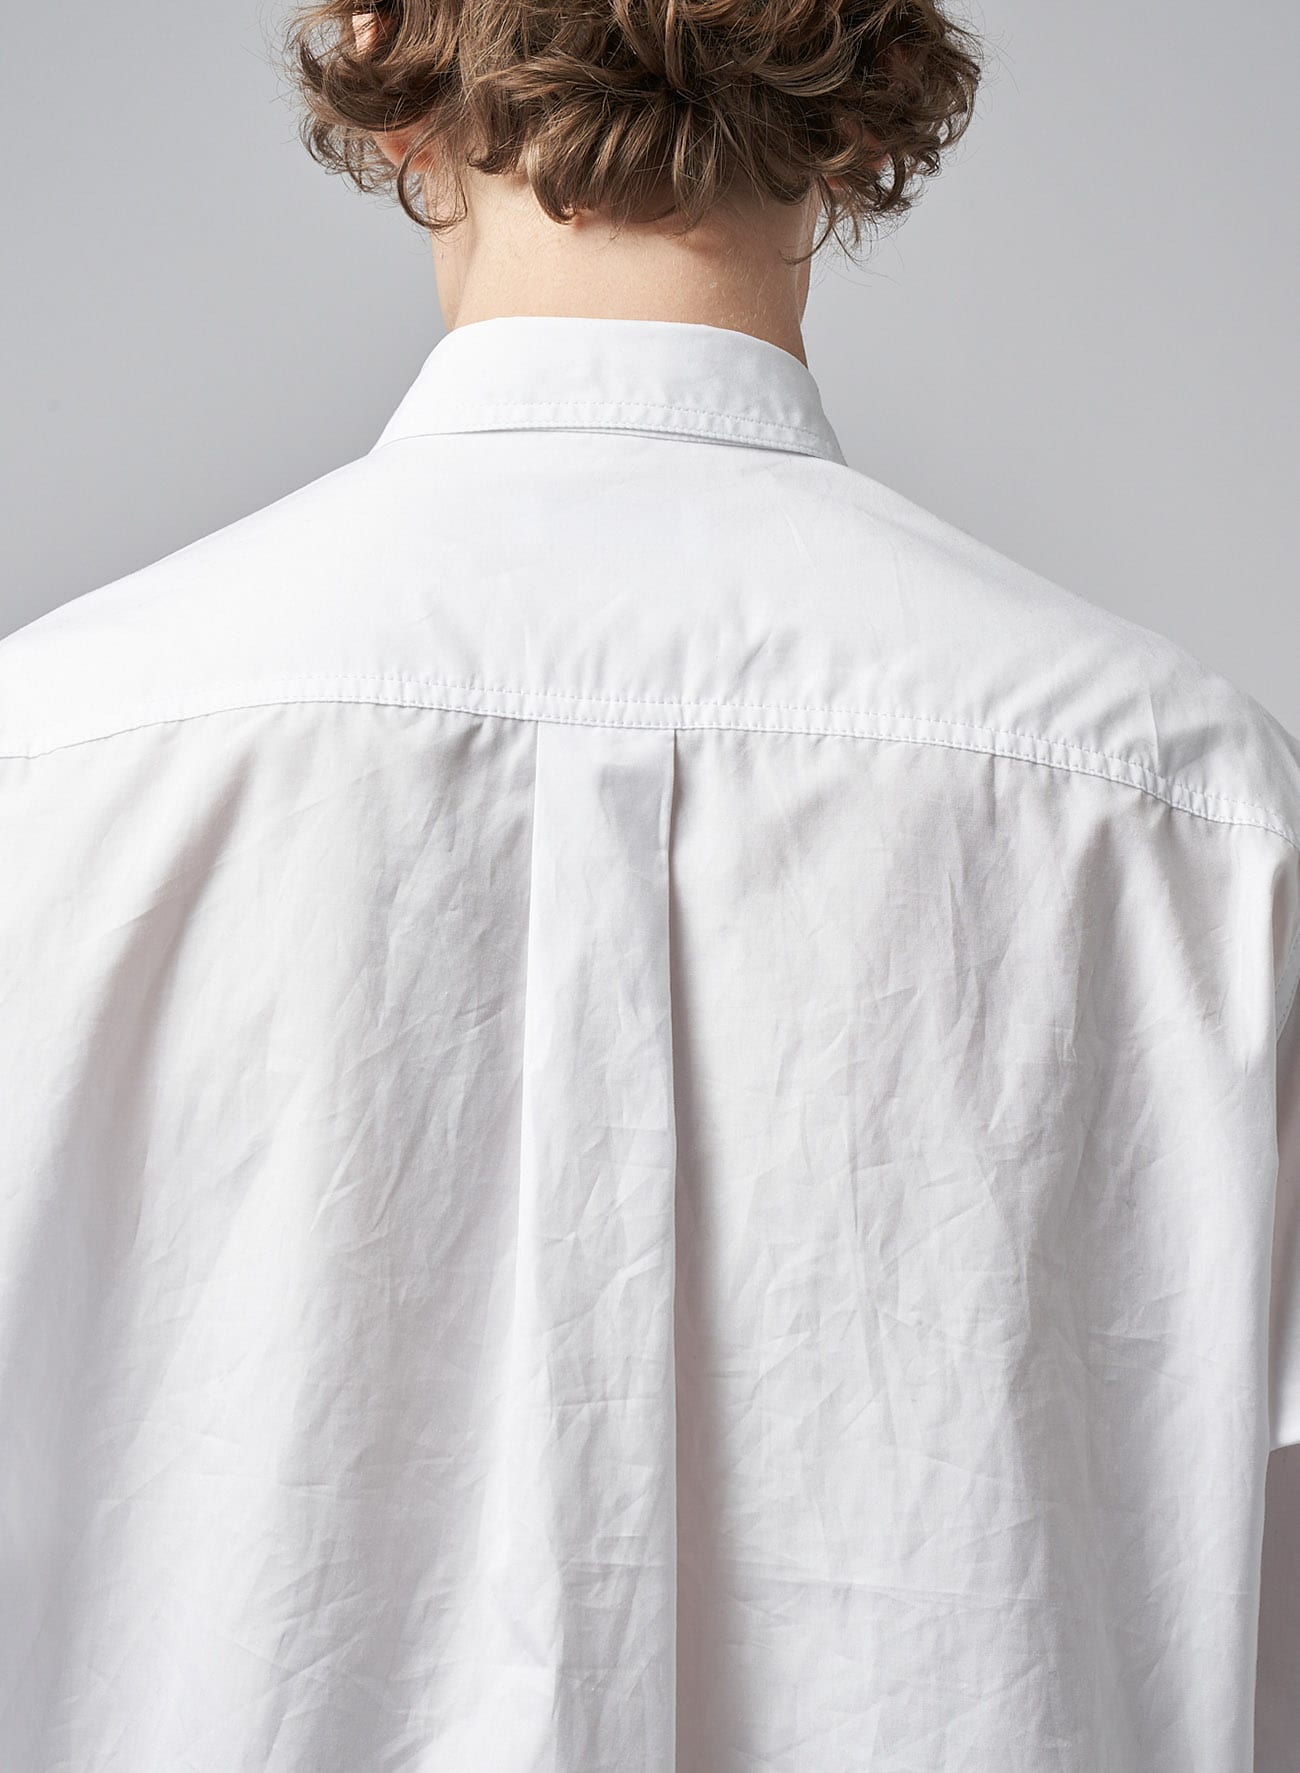 SHIRT WITH SLANTED CHEST POCKETS(S White): Vintage｜THE SHOP YOHJI 